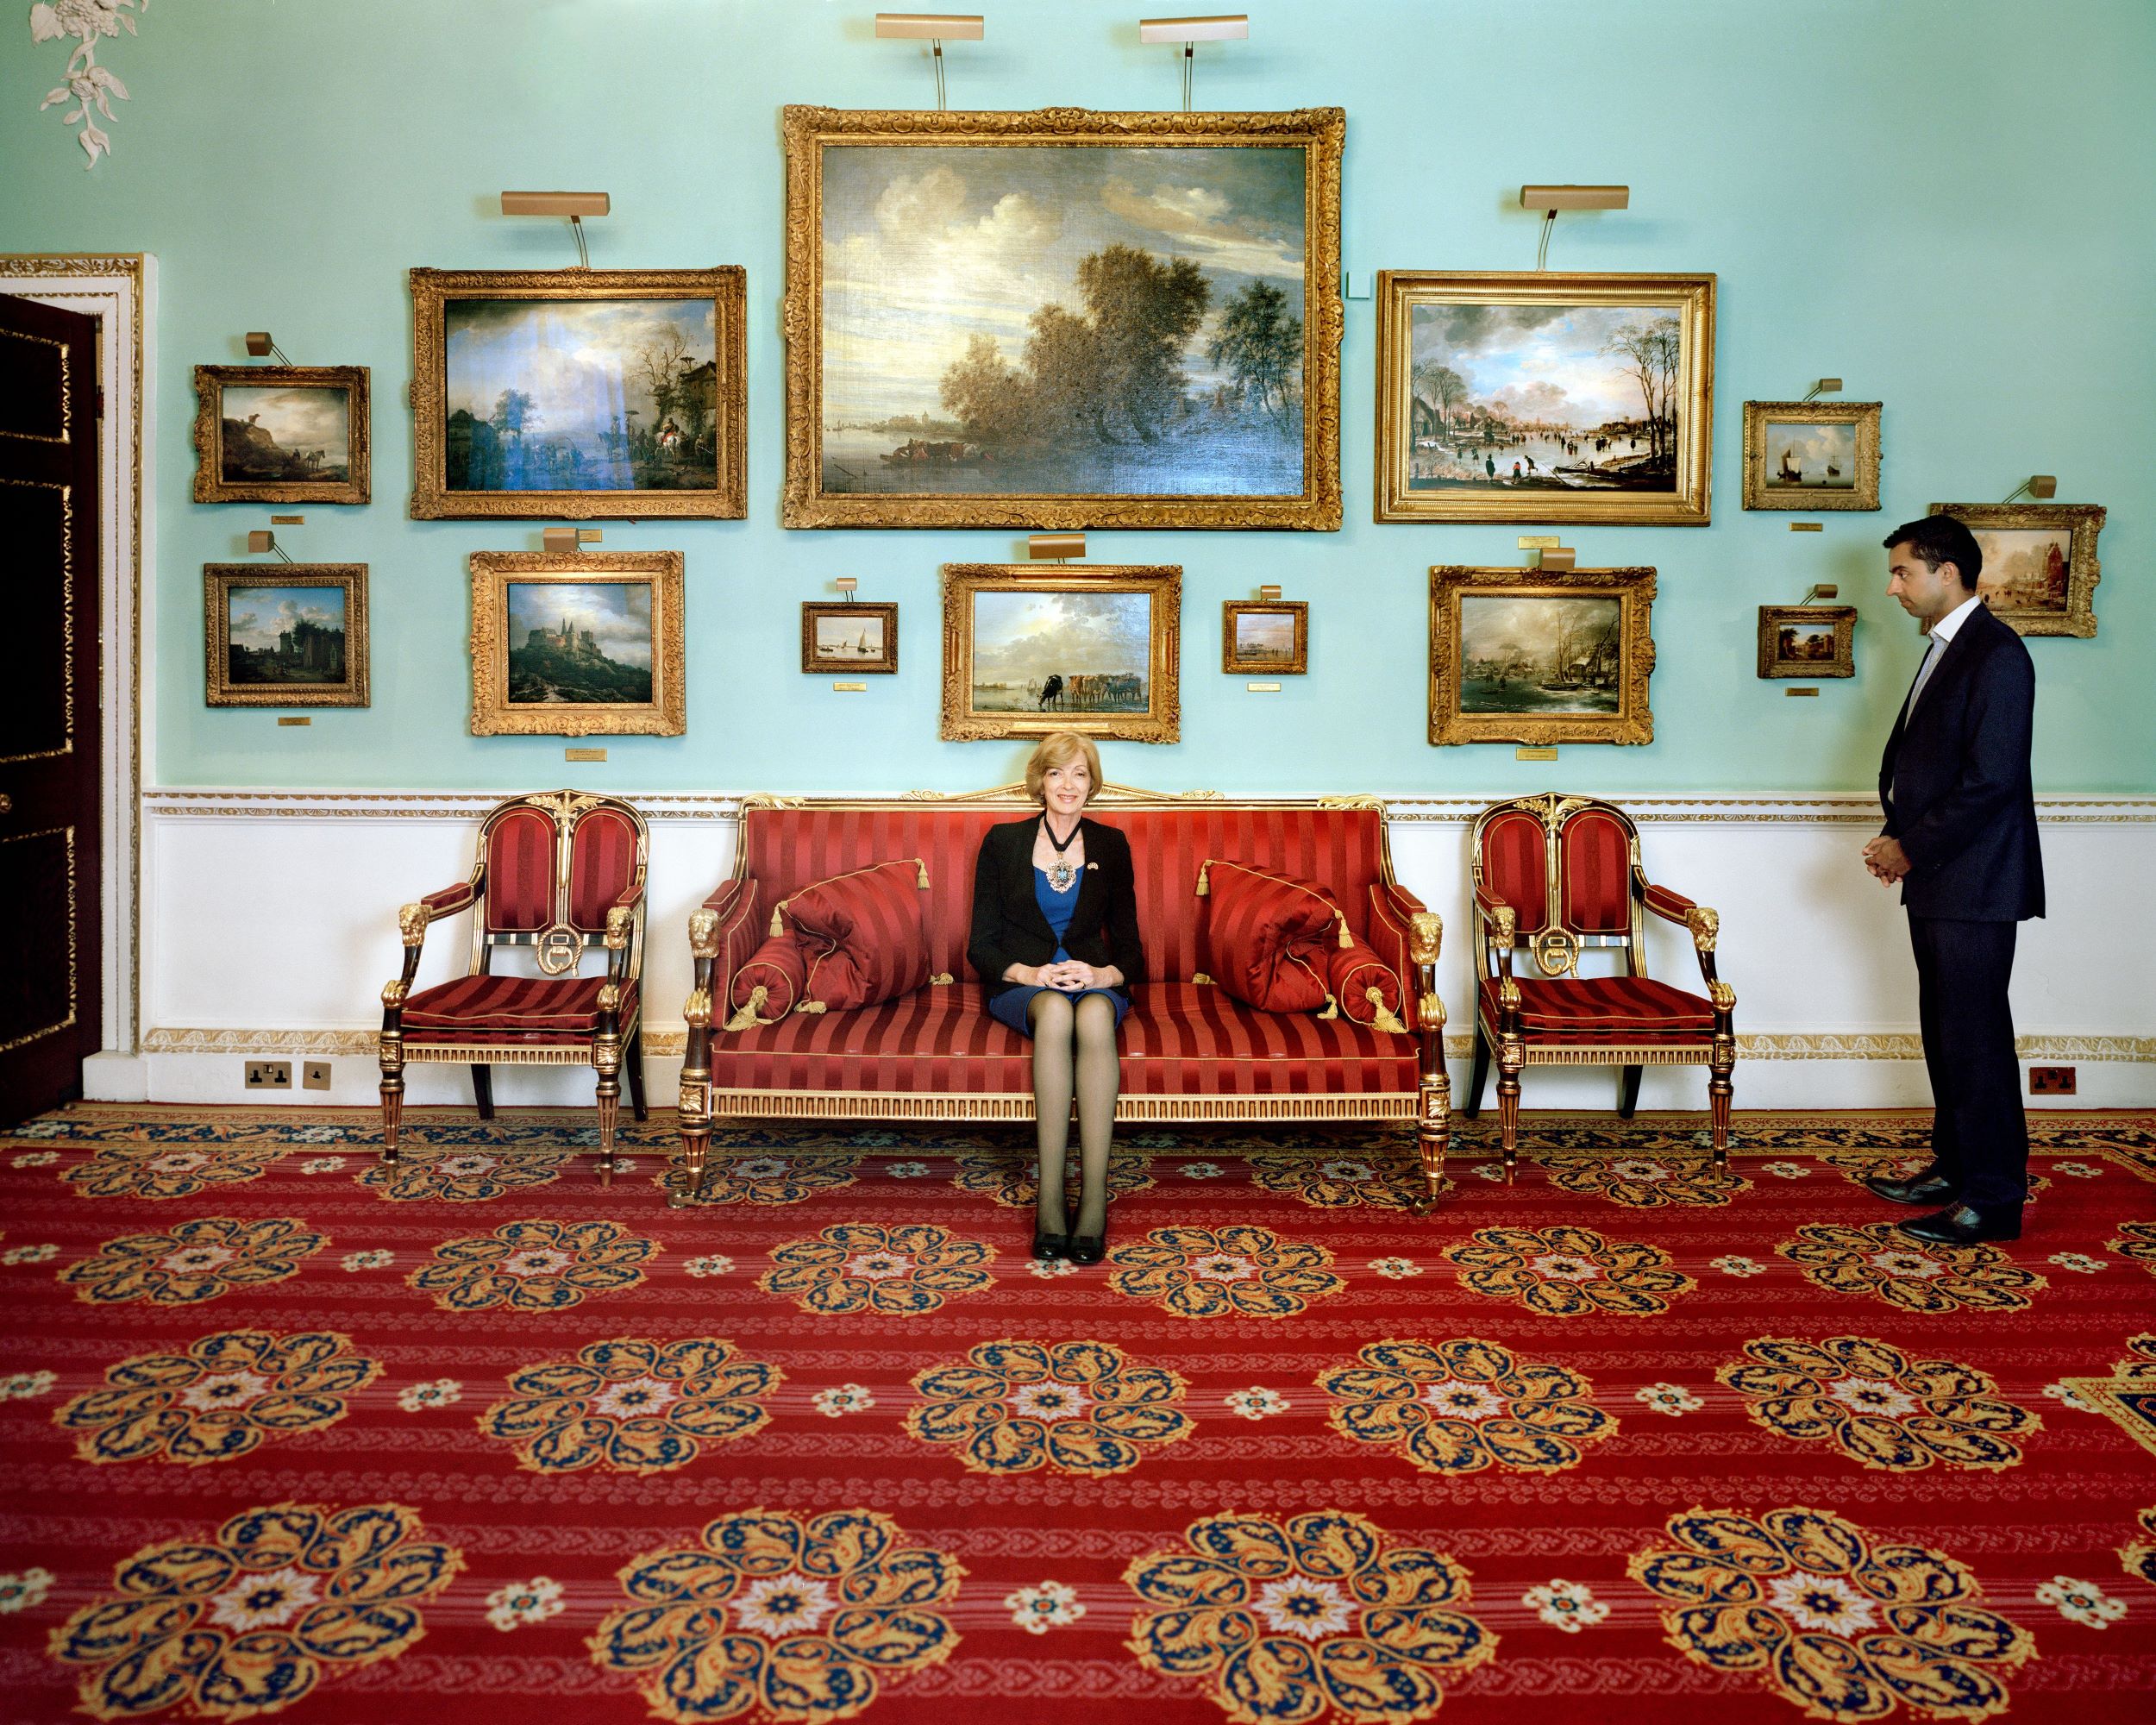 Color photograph of a blond woman in a black suit sitting on a red Empire-style couch in room with an ornate red carpet and multiple landscape paintings on the walls. To the right is a man in a dark suit turned toward the woman.